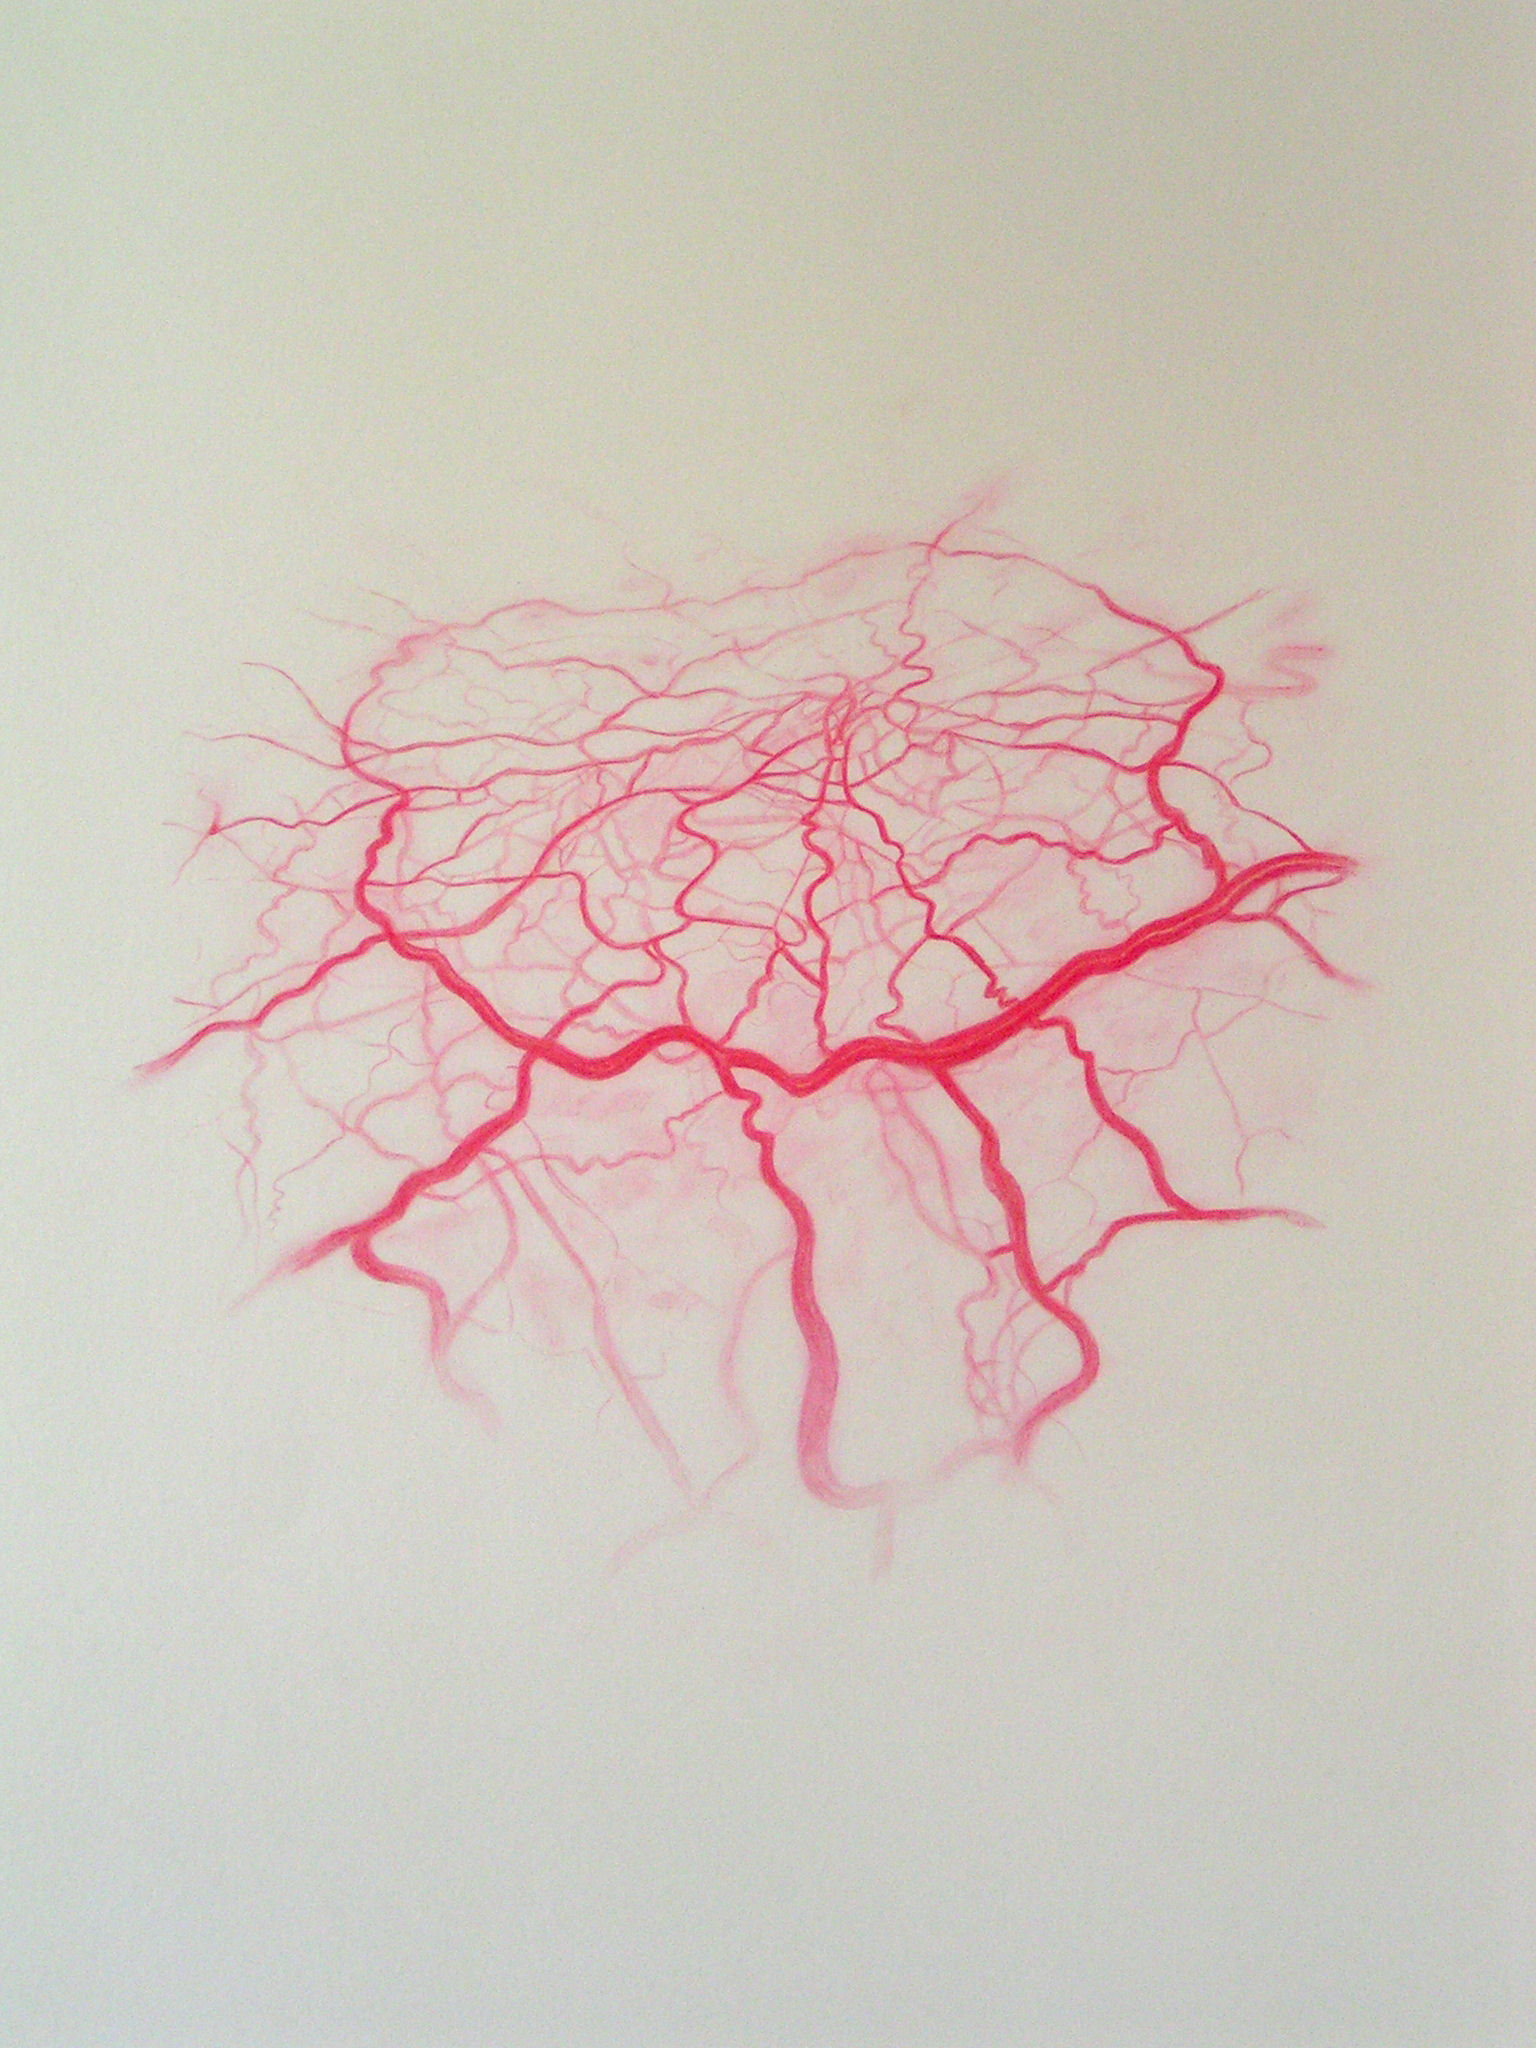 Emma J Williams 'Untitled Red Drawing No.11' 2008 pencil on paper